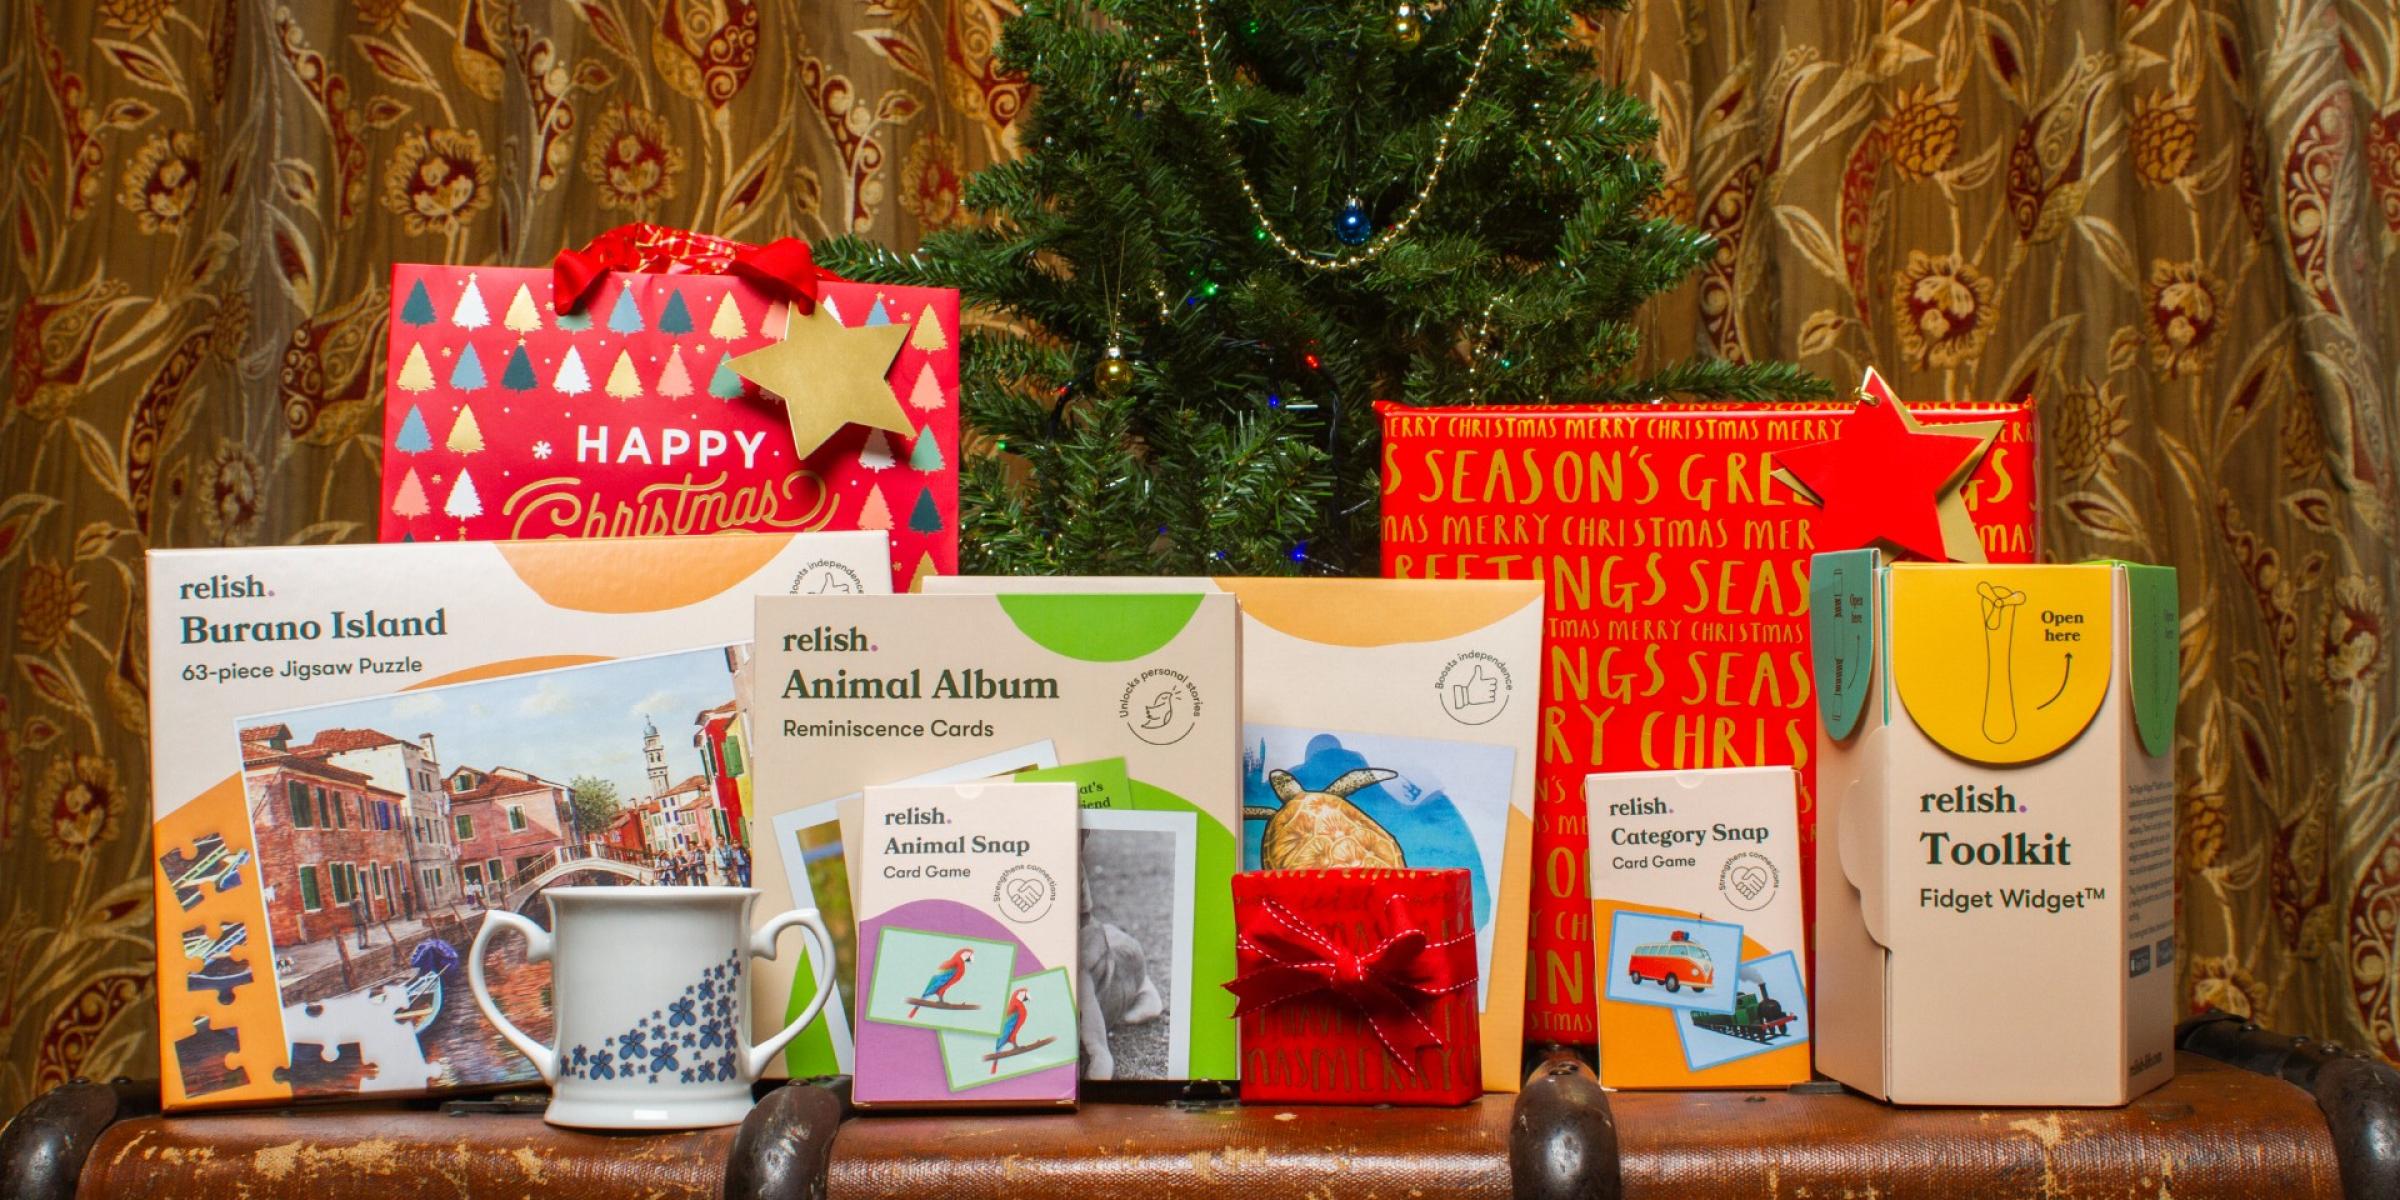 A selection of Christmas gifts in front of a Christmas tree